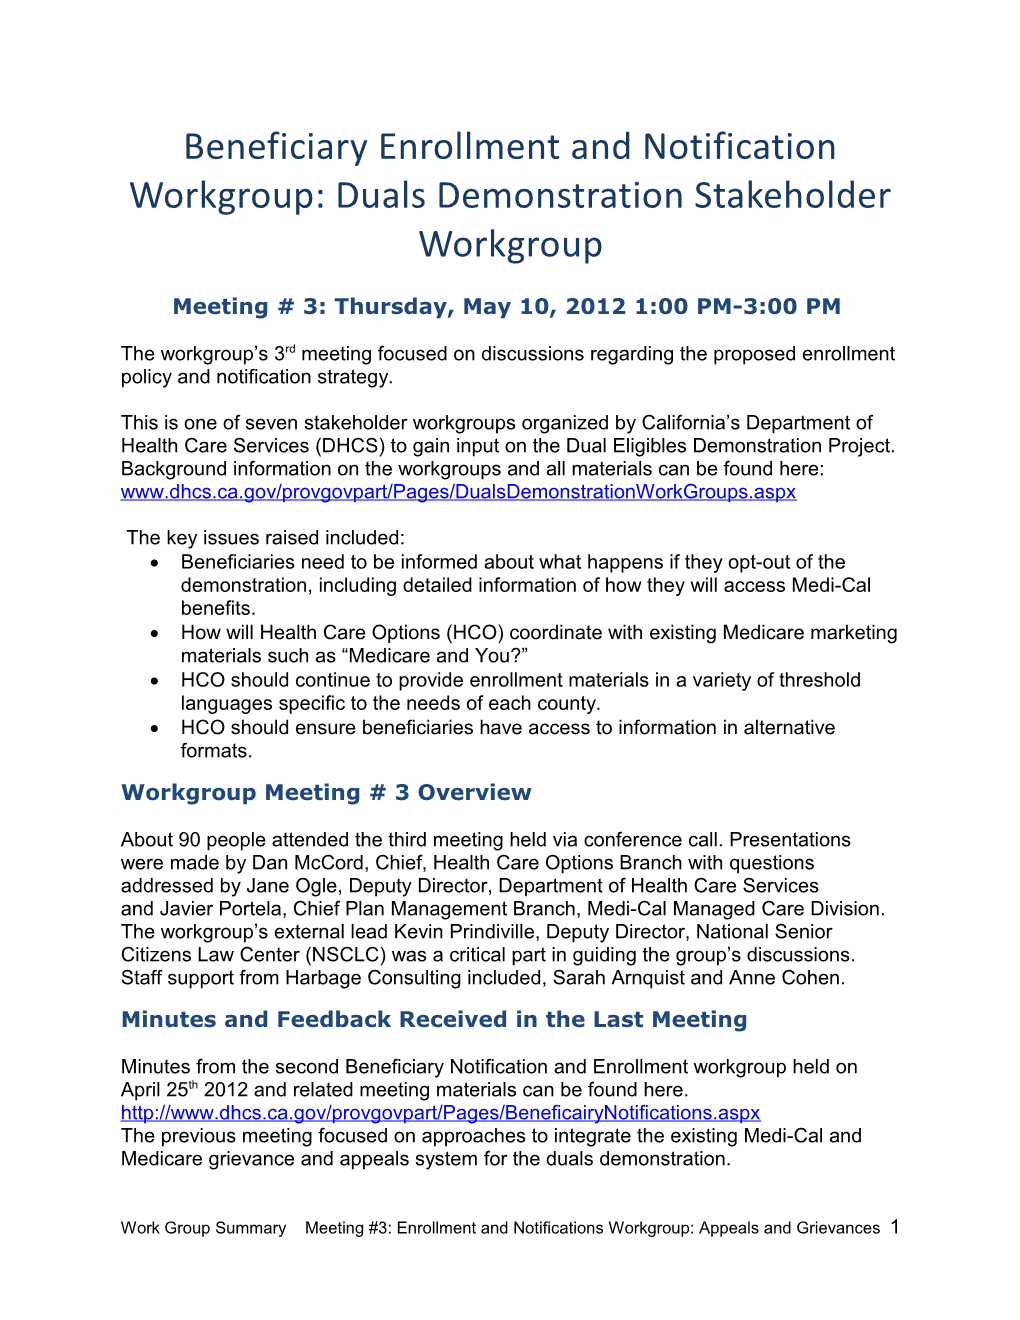 Beneficiary Enrollment and Notification Workgroup: Duals Demonstration Stakeholder Workgroup